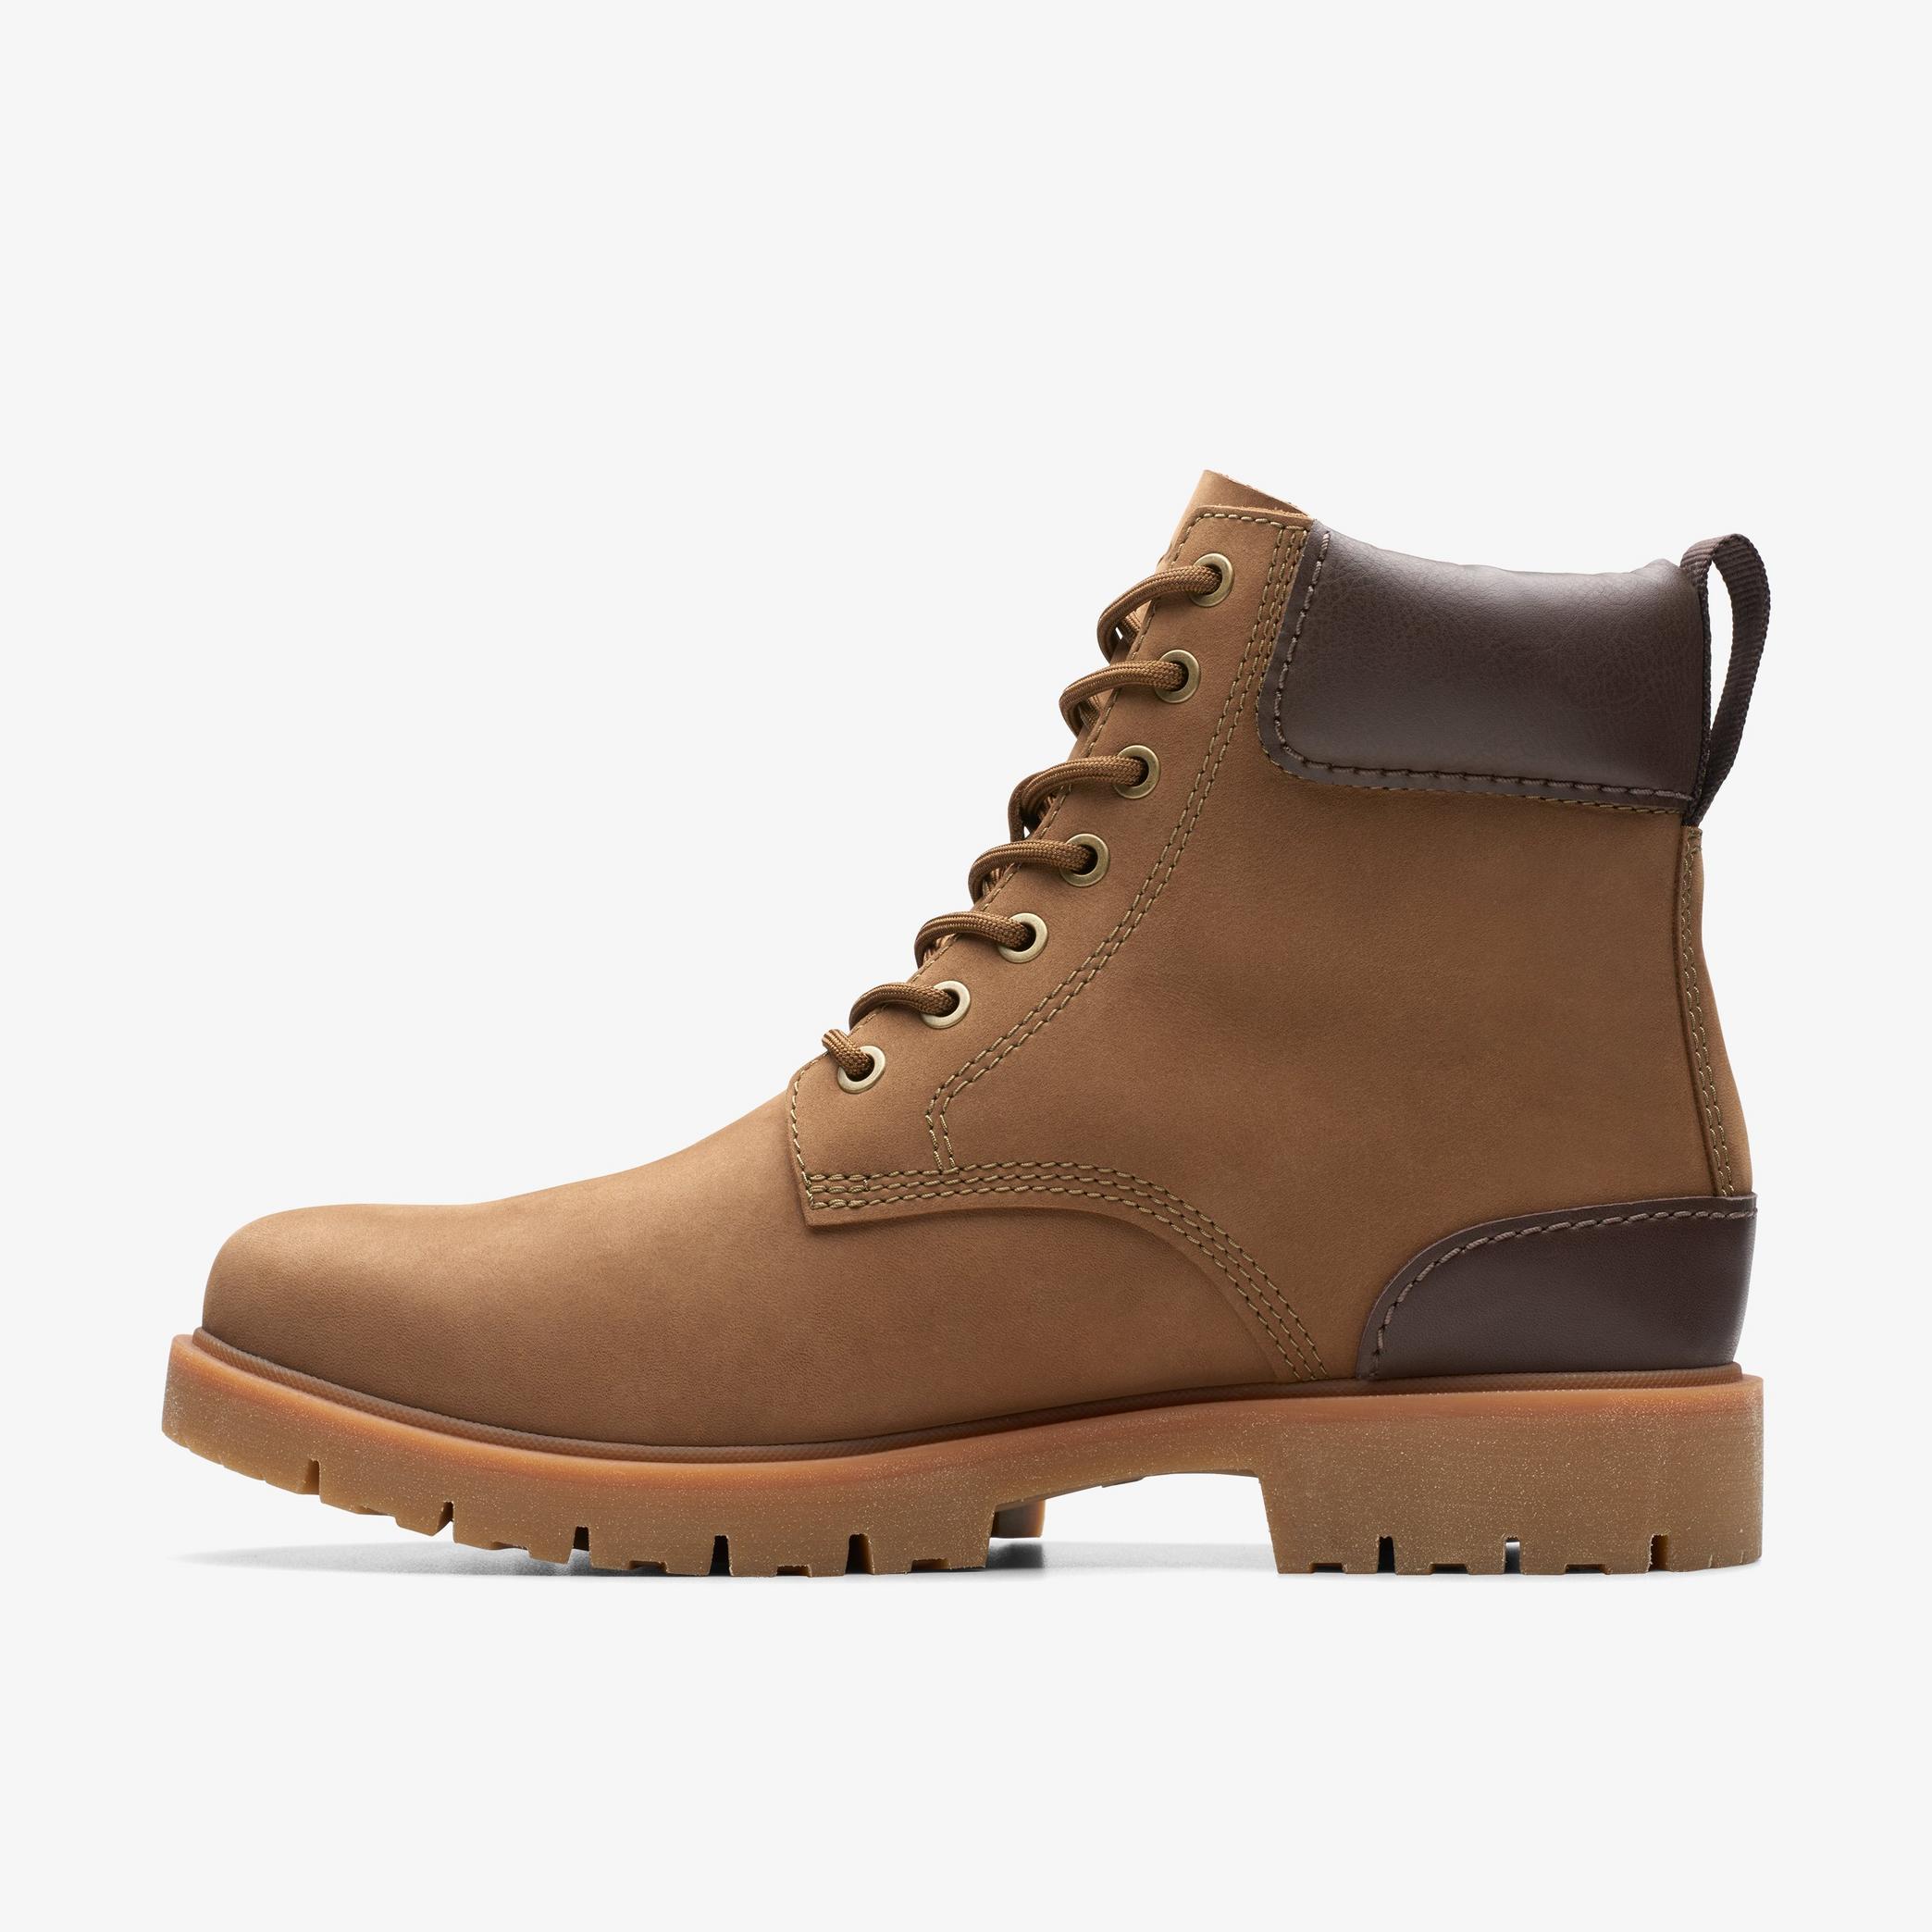 Mens Rossdale Hi GORE-TEX Dark Sand Leather Ankle Boots | Clarks UK